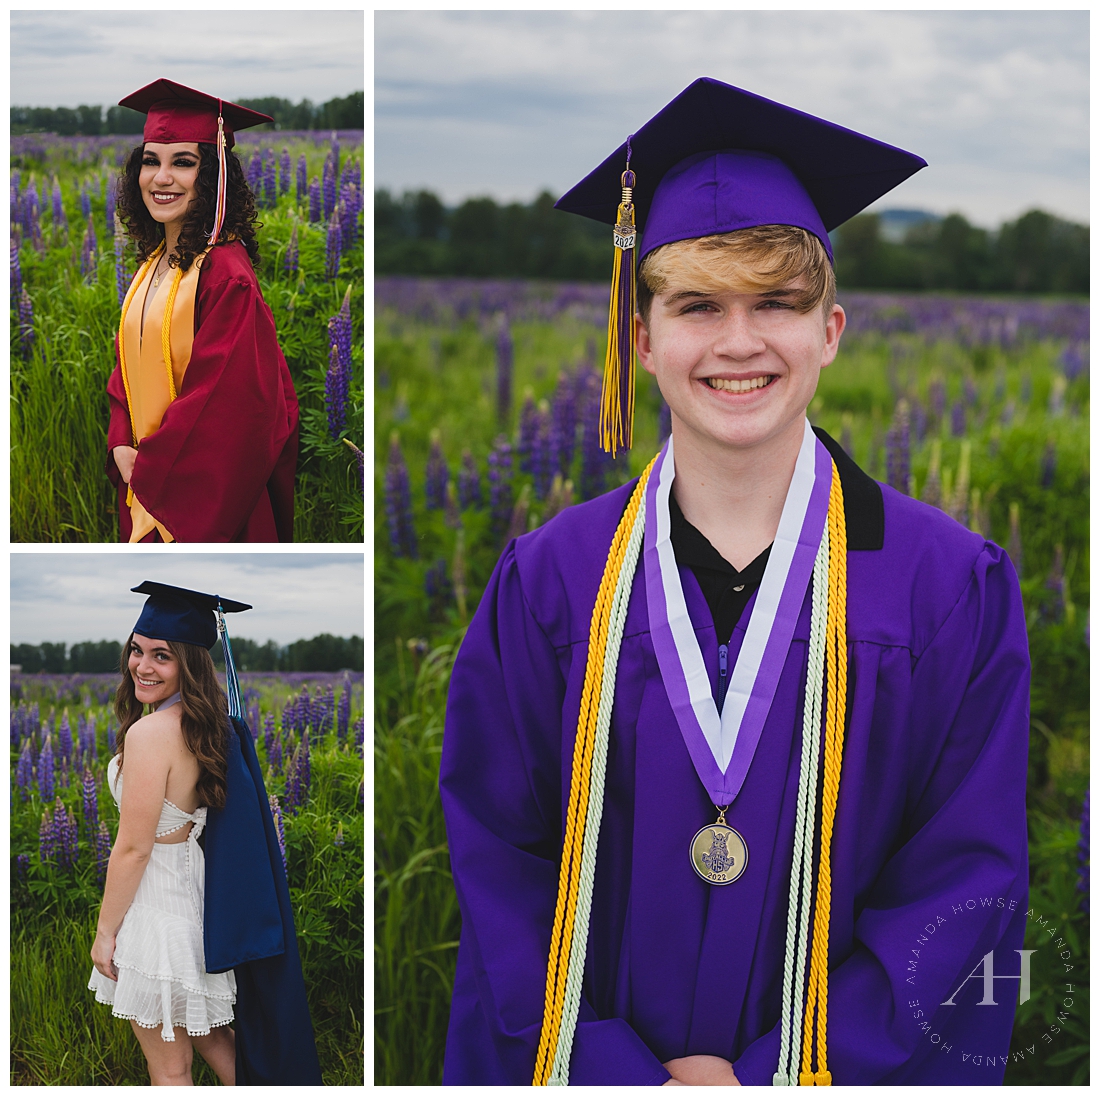 Outdoor Senior Portraits in WA | Graduation Cap and Gown Portrait Inspiration | Photographed by the Best Tacoma Senior Portrait Photographer Amanda Howse